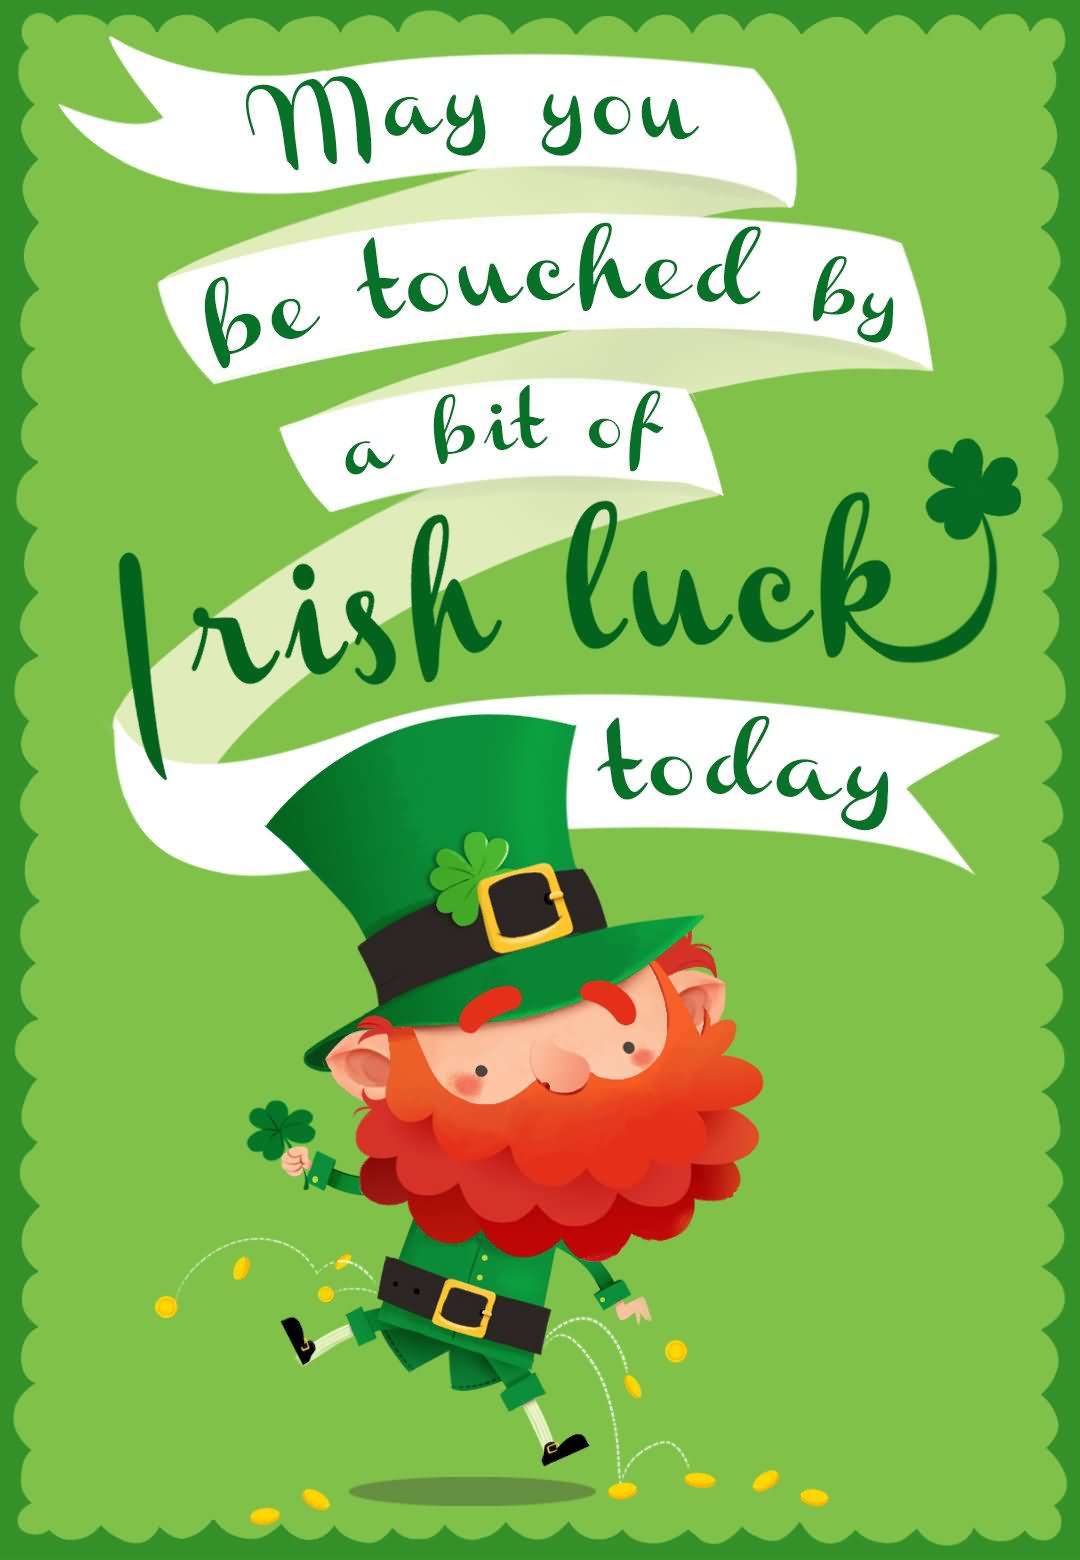 May You Be Touched By A Bit Of Irish Luck Today – Happy Saint Patrick’s Day